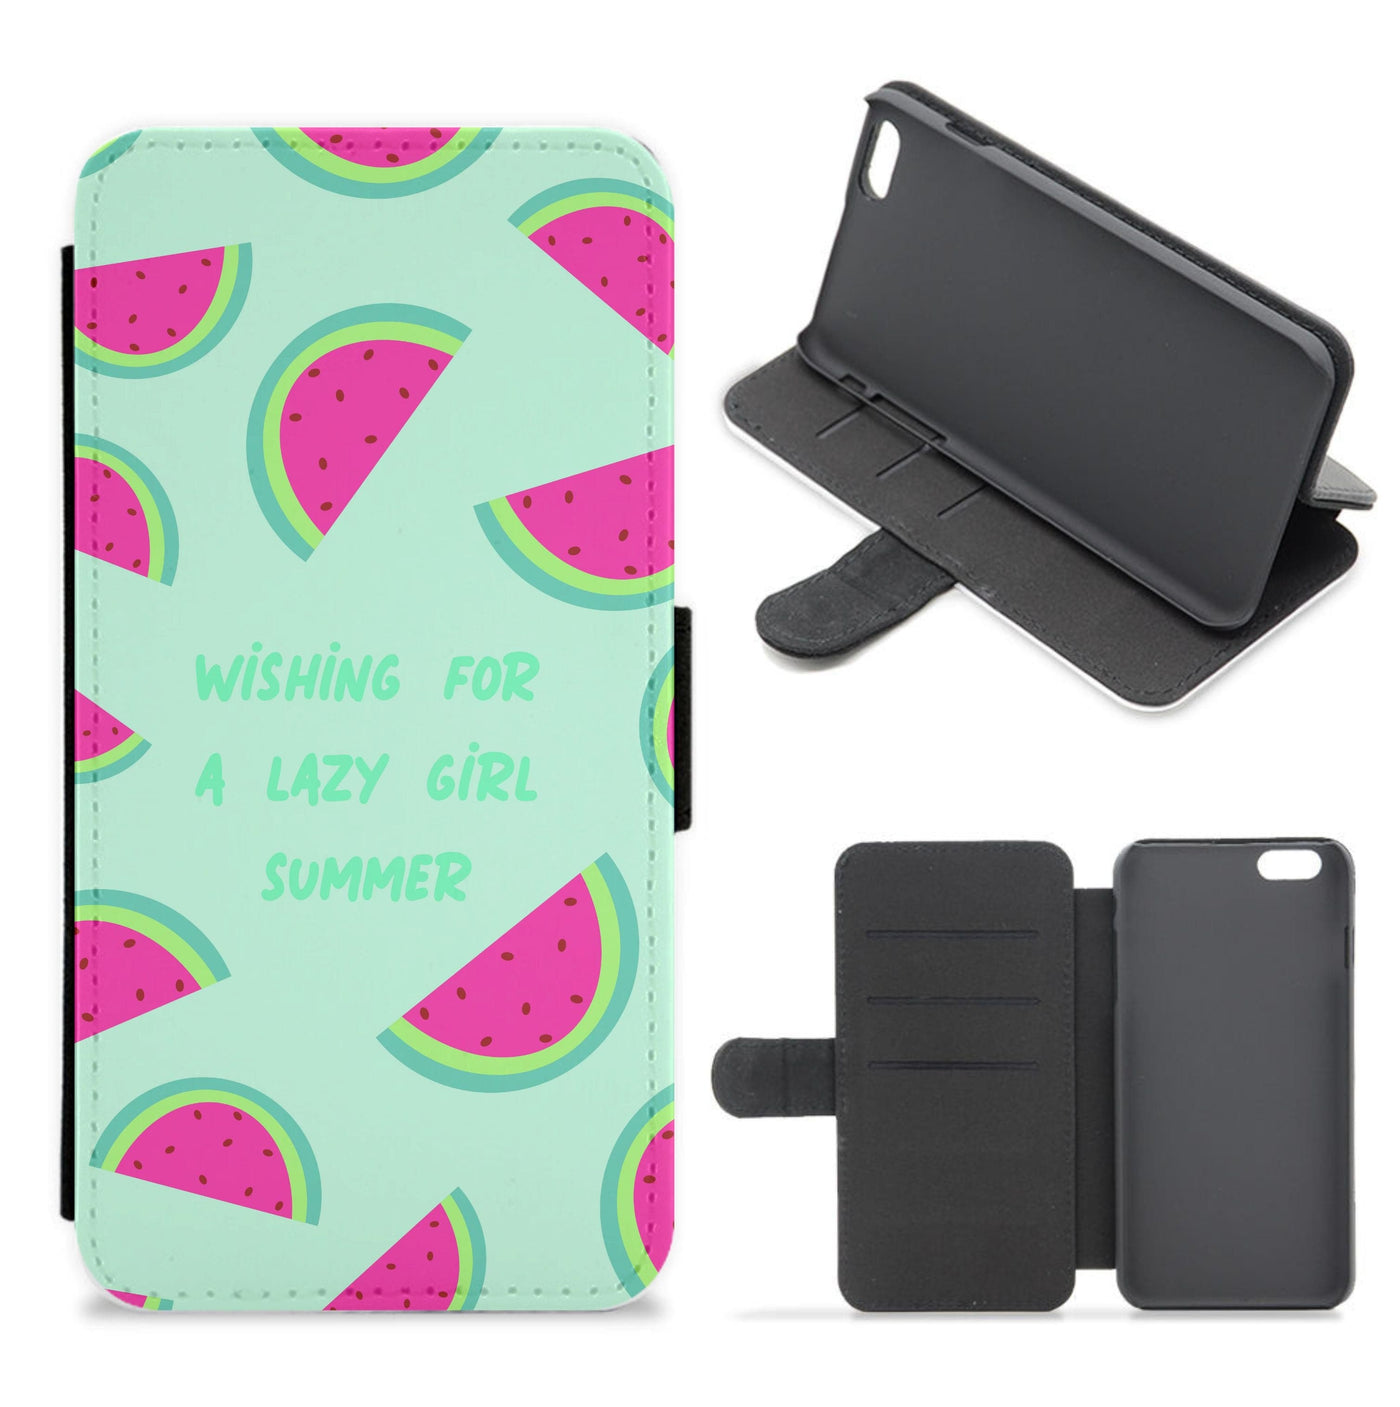 Wishing For A Lazy Girl Summer - Summer Flip / Wallet Phone Case